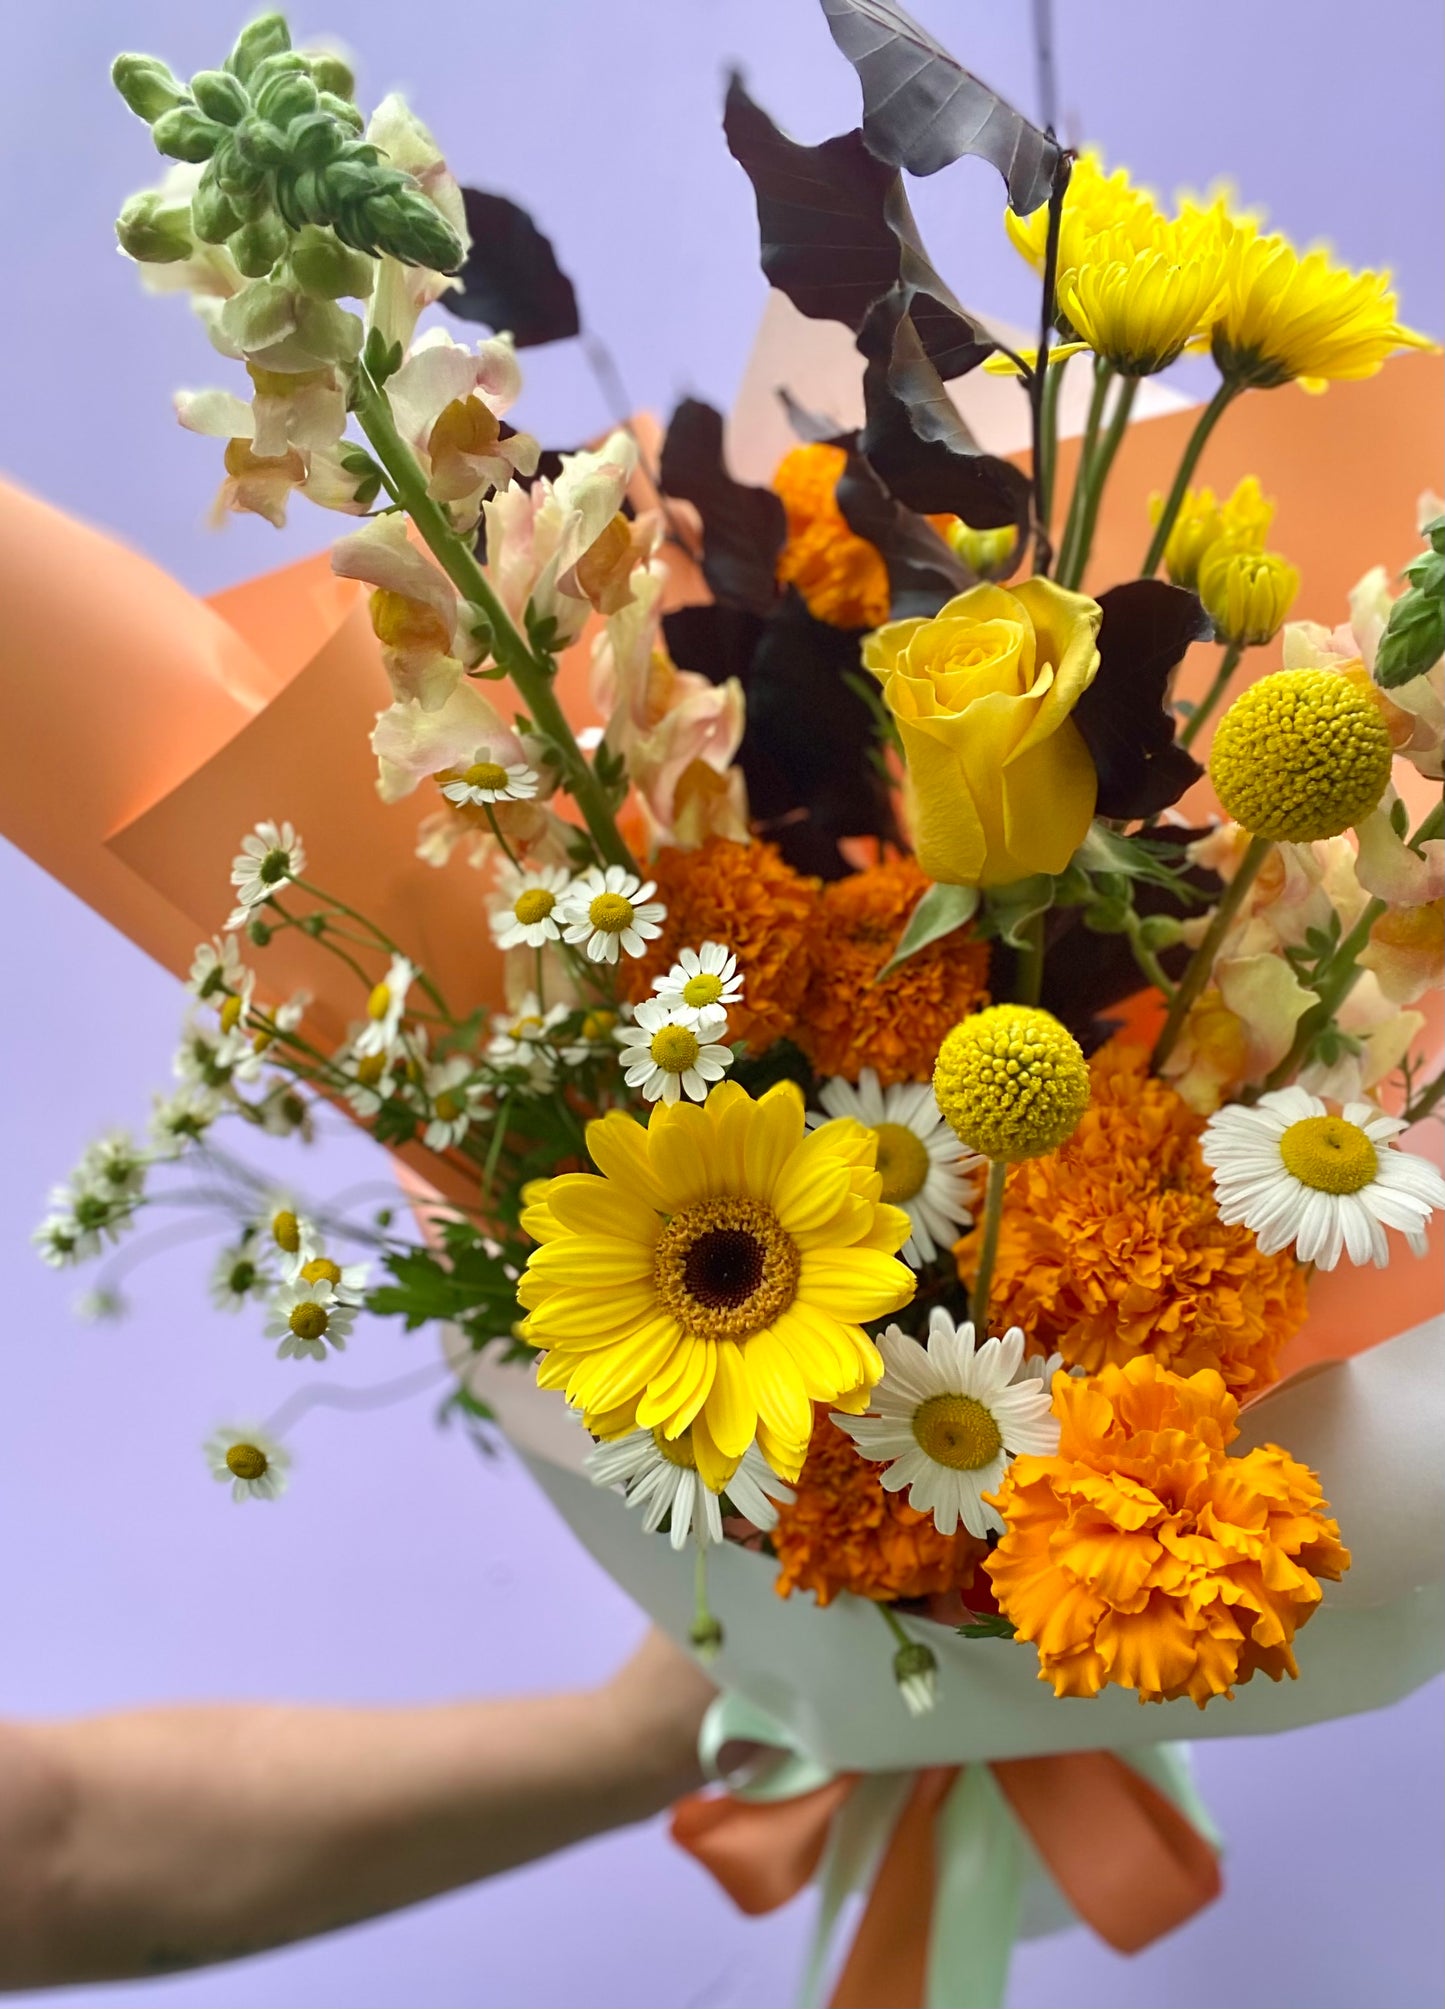 Gift A Flower Subscription - x4 gorgeous fresh flower deliveries